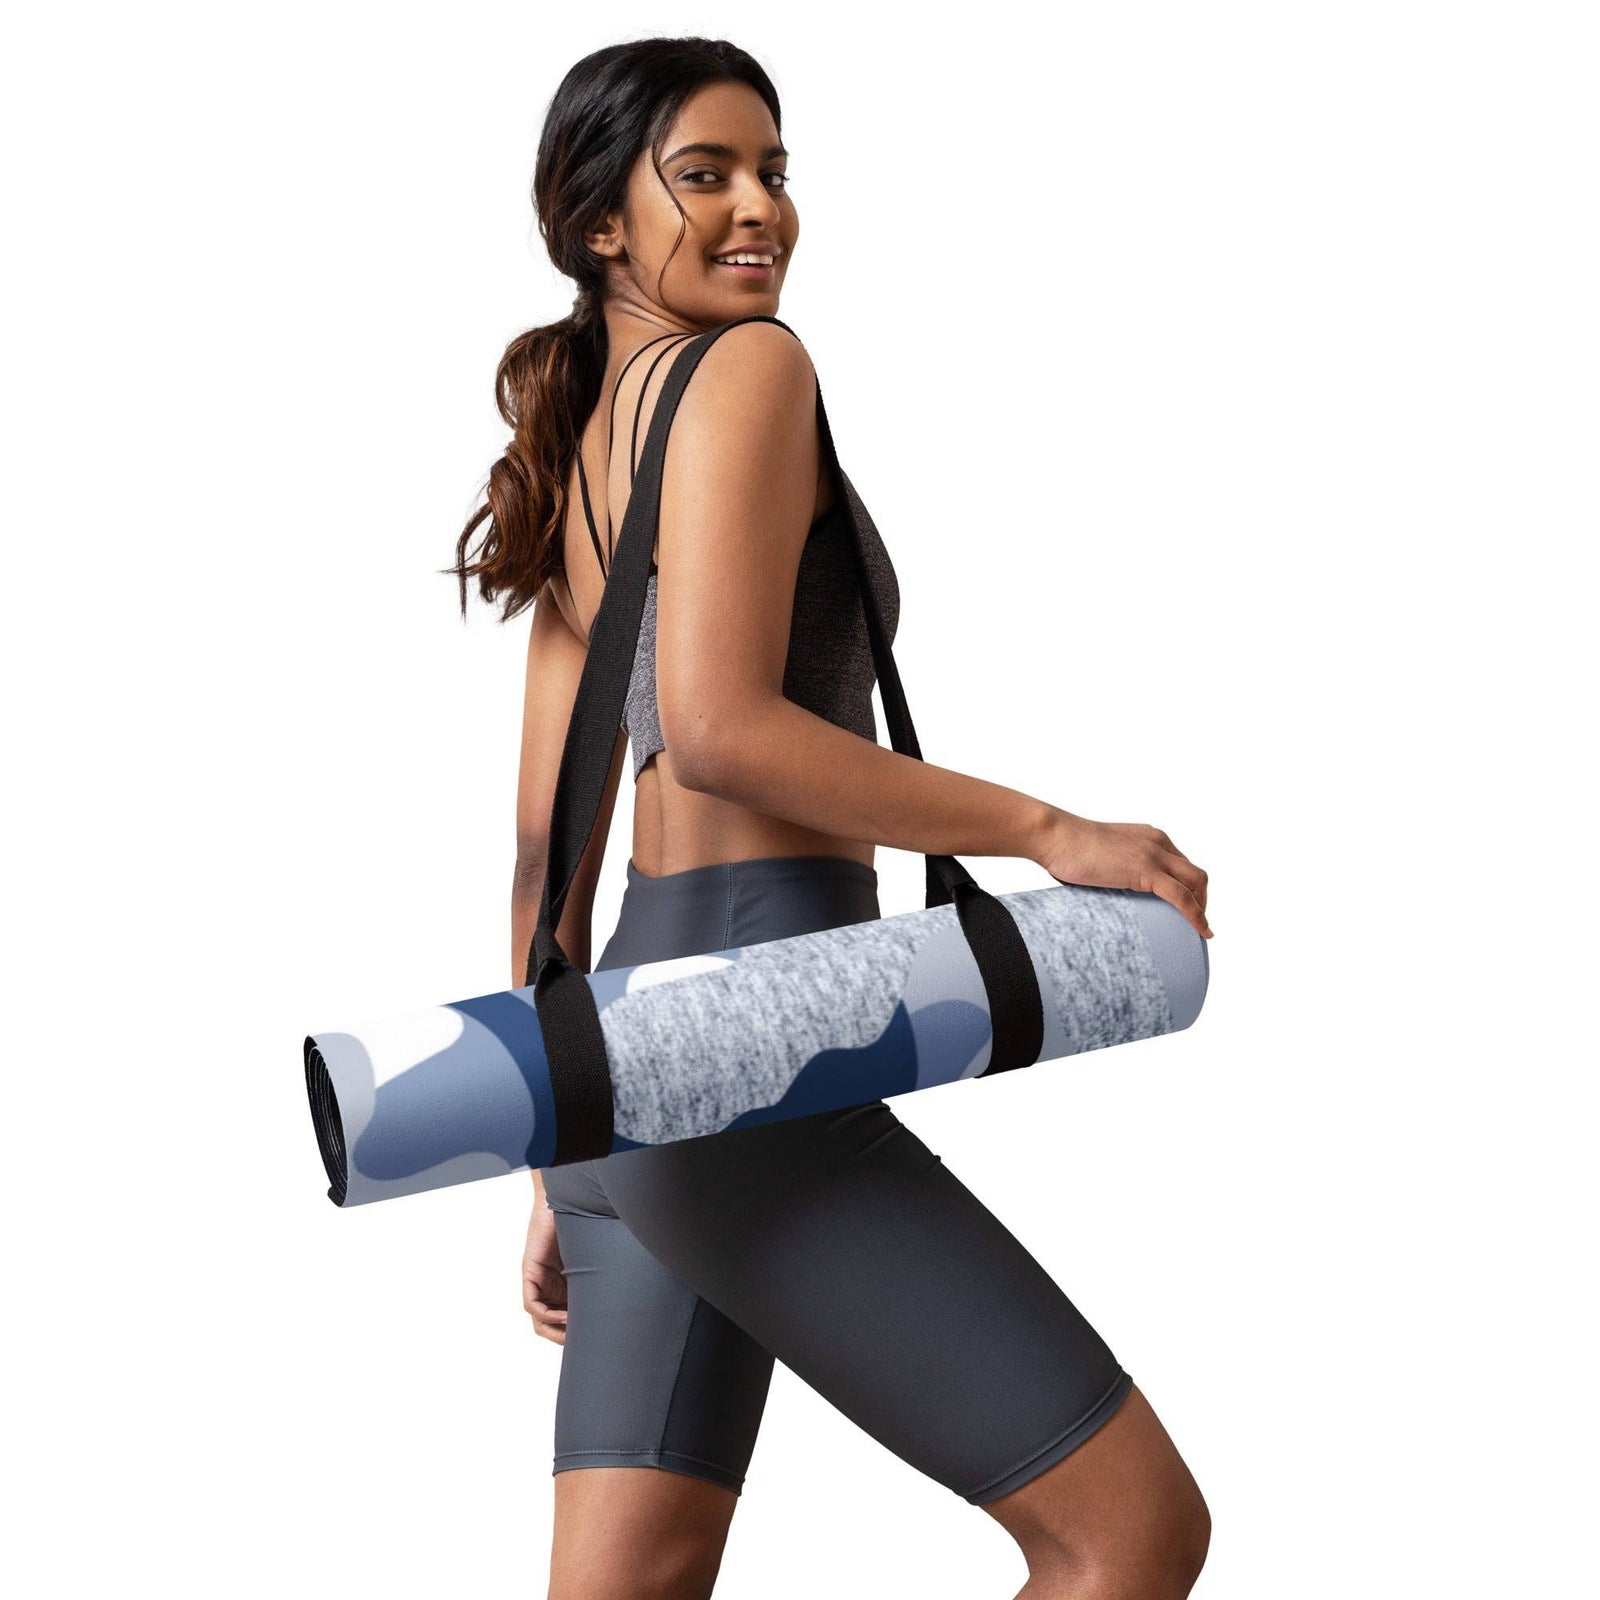 Blue Yoga Mat Perfect for Stretching and Support - Revive Wear     Blue Yoga Mat. Our anti-slip, hand-made mat provides added cushioning and support. Plus, it comes with a convenient carry handle to help your practice flow. Free Shipping.